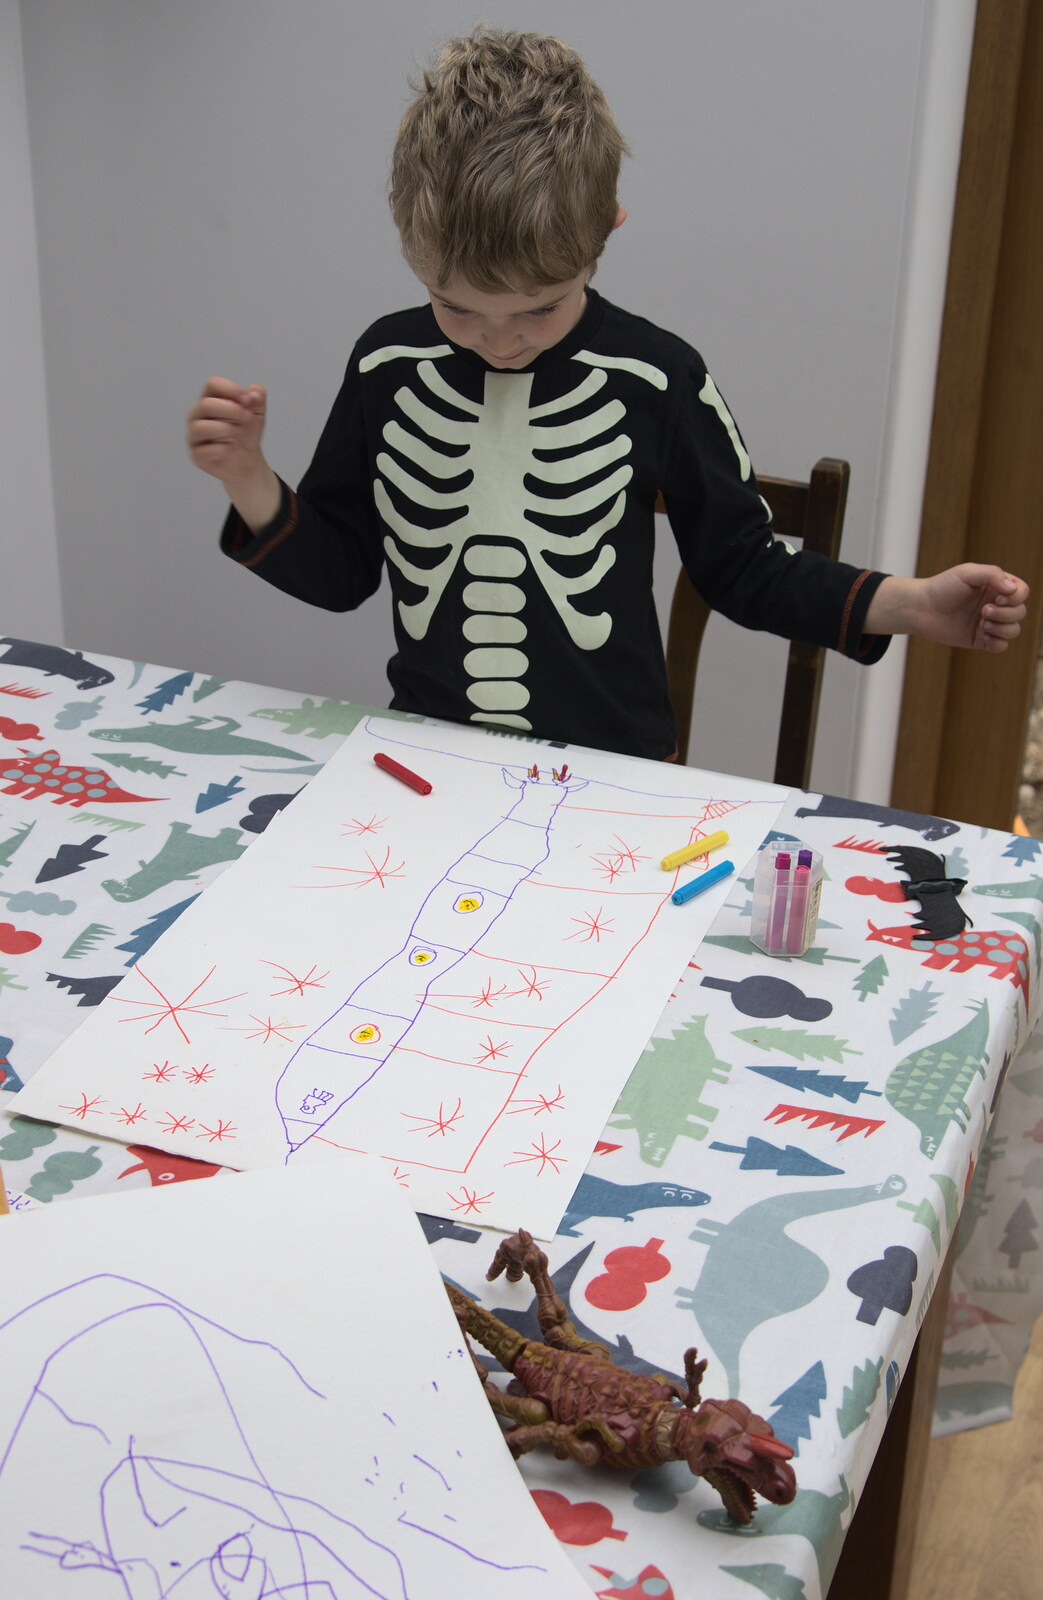 Fred draws a rocket from A Halloween Party at the Village Hall, Brome, Suffolk - 31st October 2014